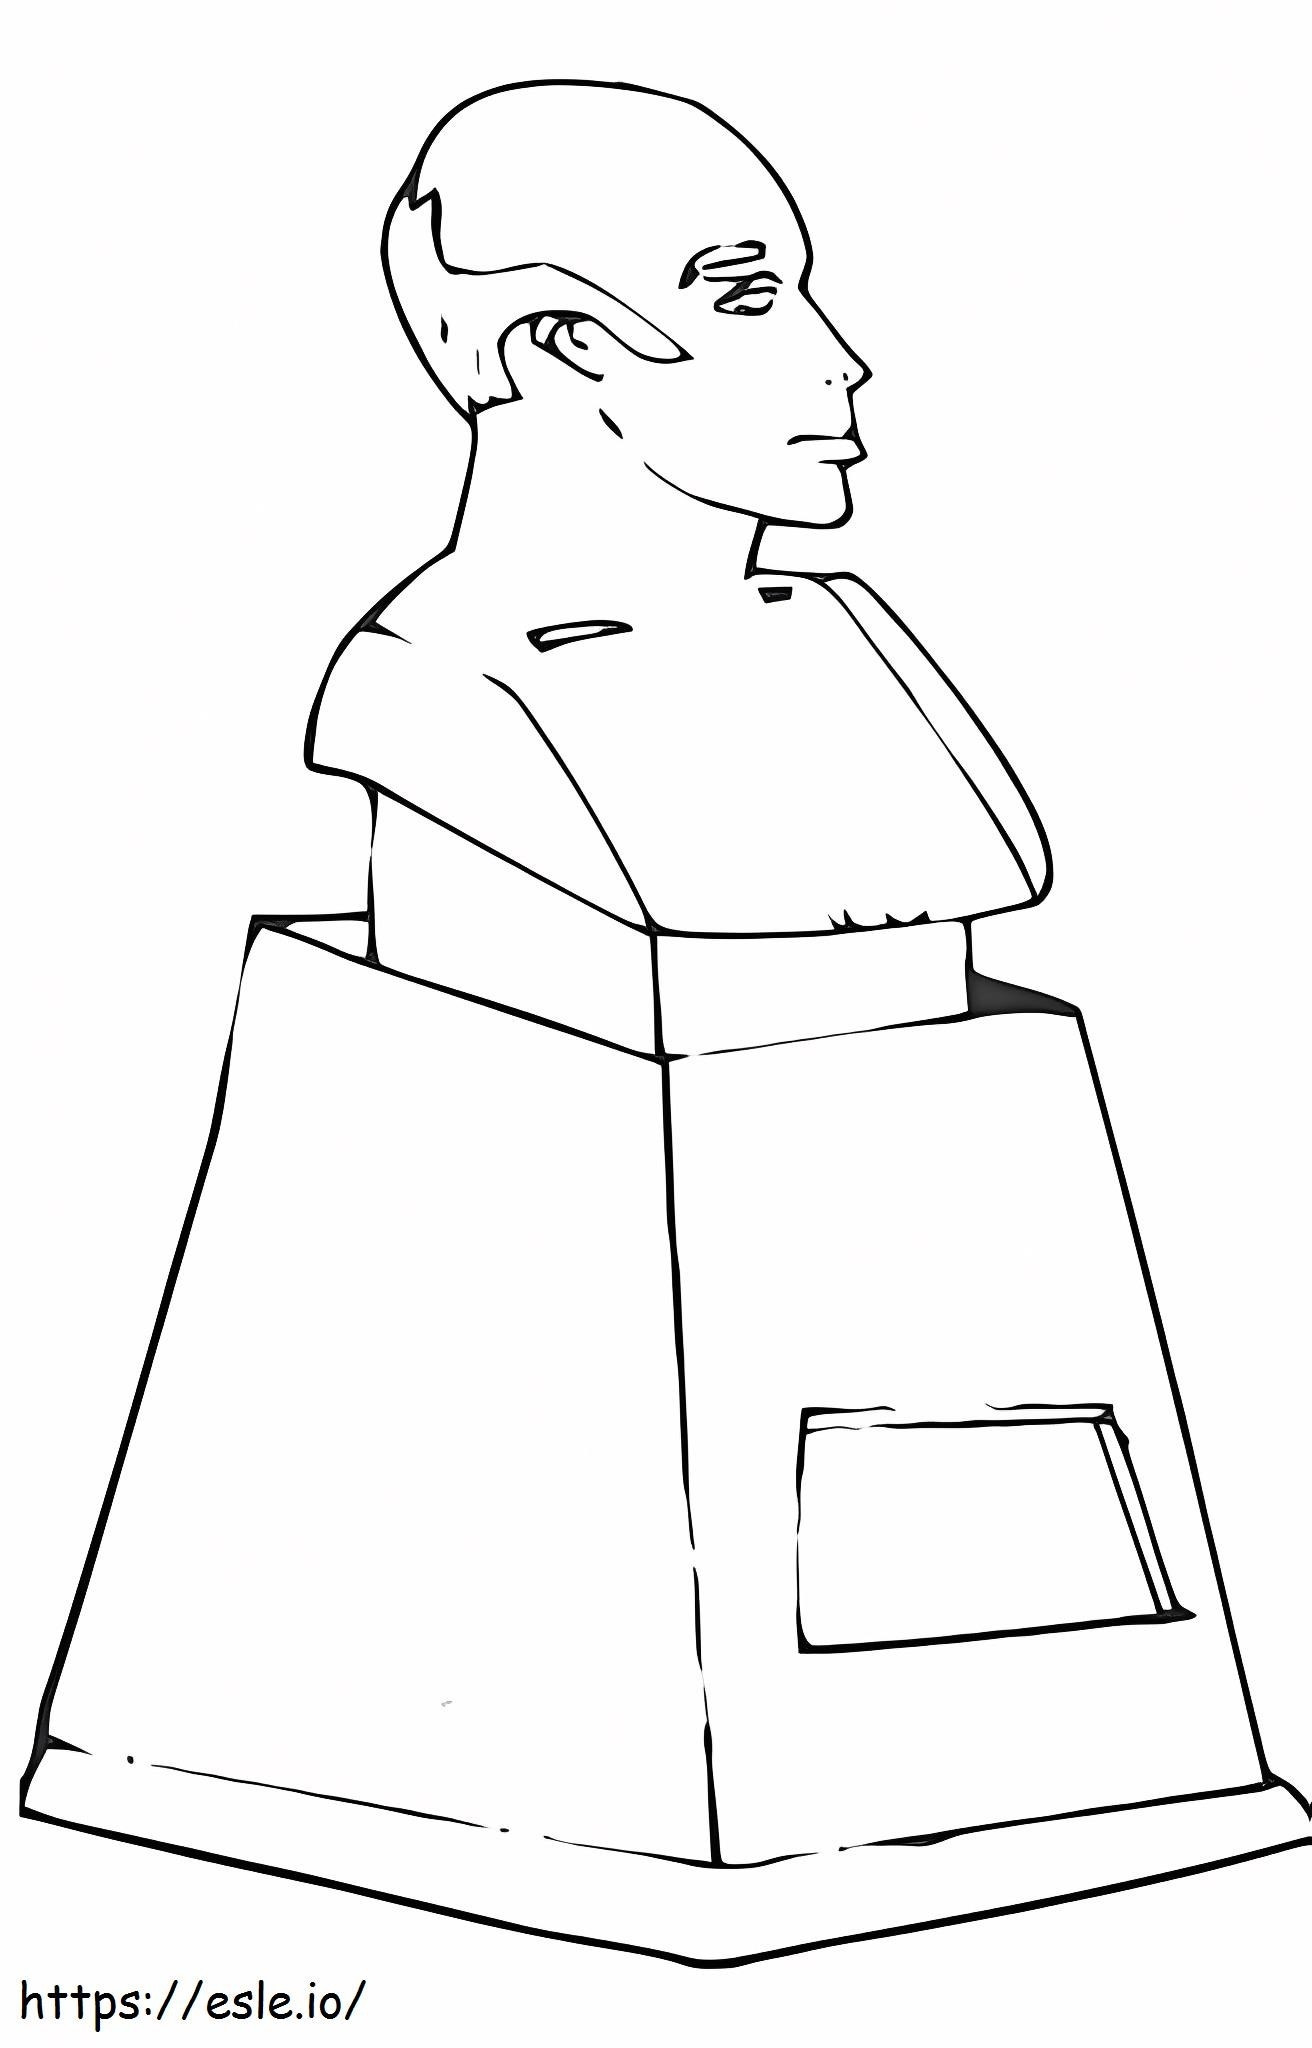 Human Statue coloring page